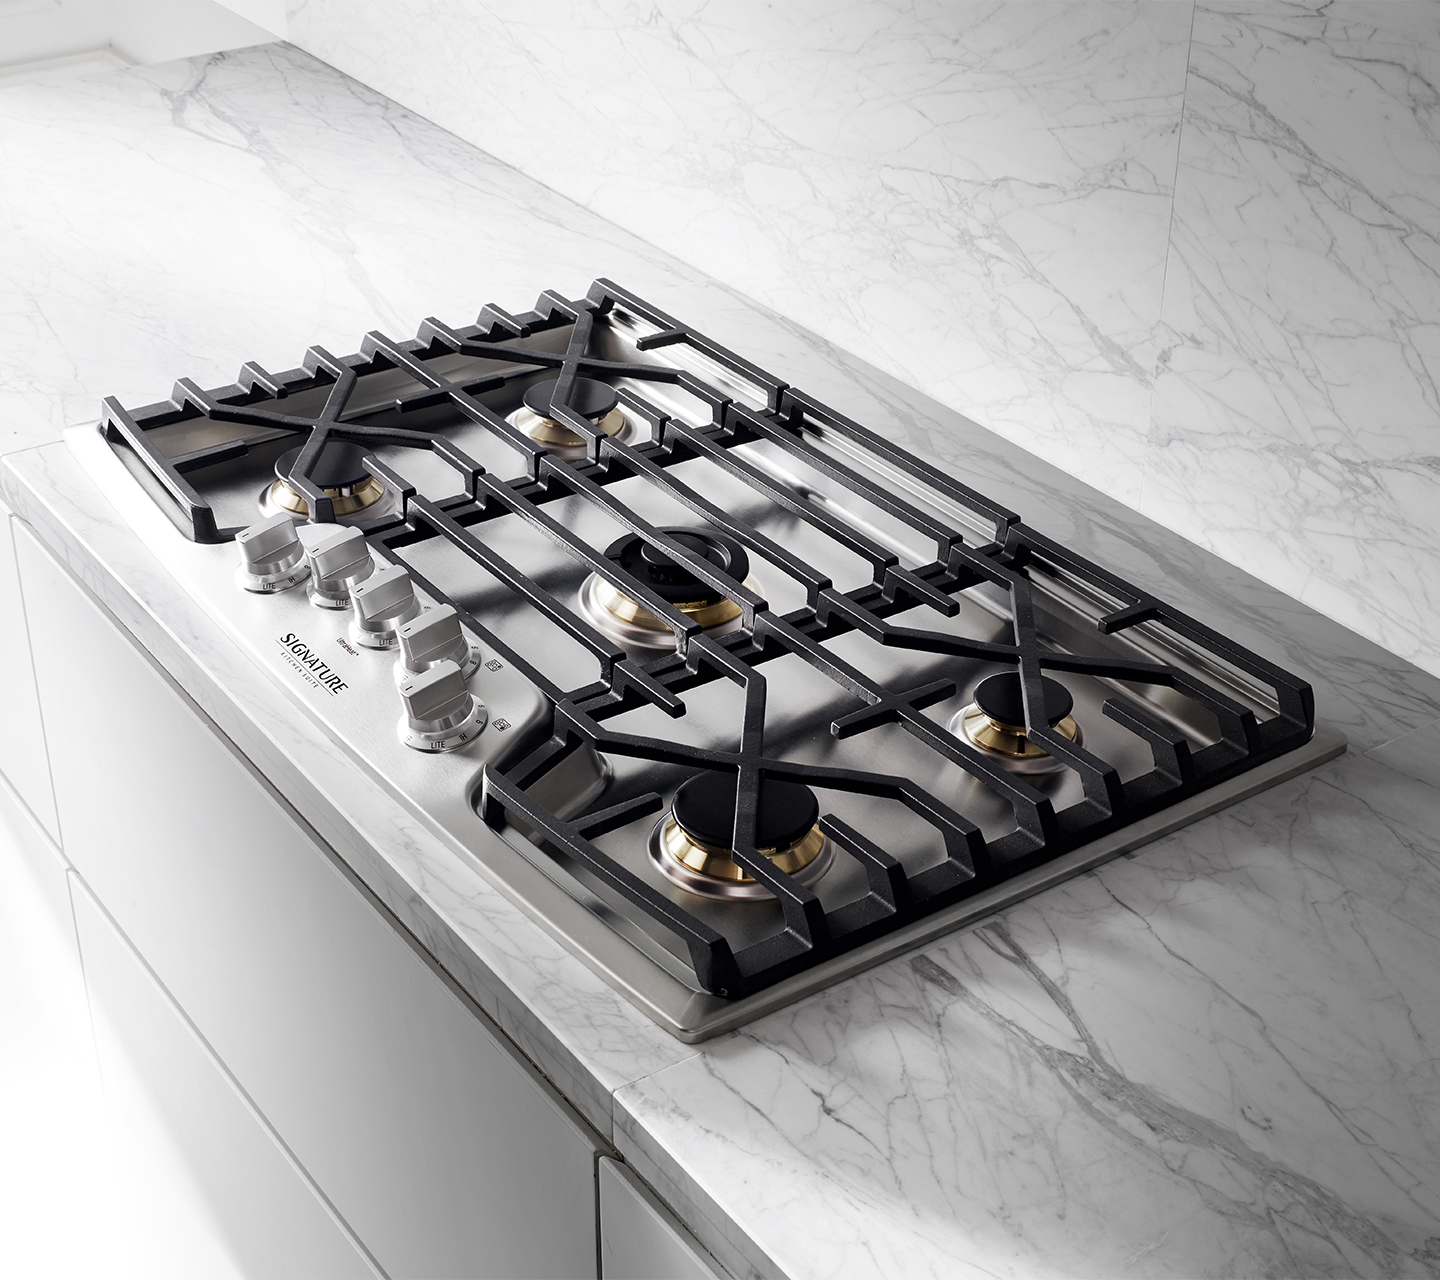 Gas cooktop with cast iron grates from Signature Kitchen Suite